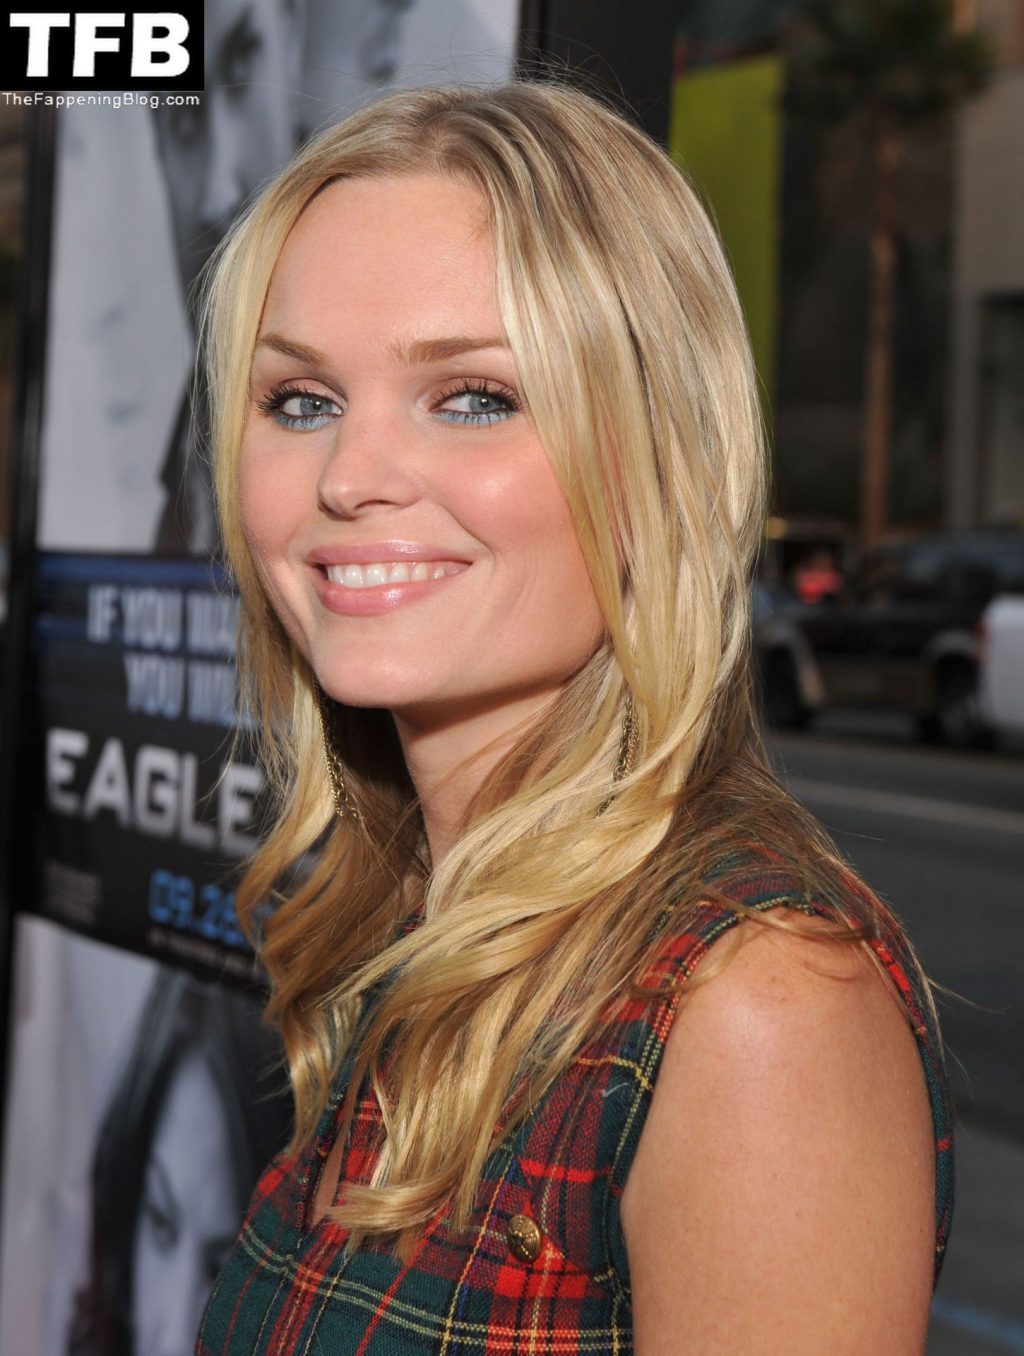 Check out Sunny Mabrey’s sexy pictures from various shoots, events